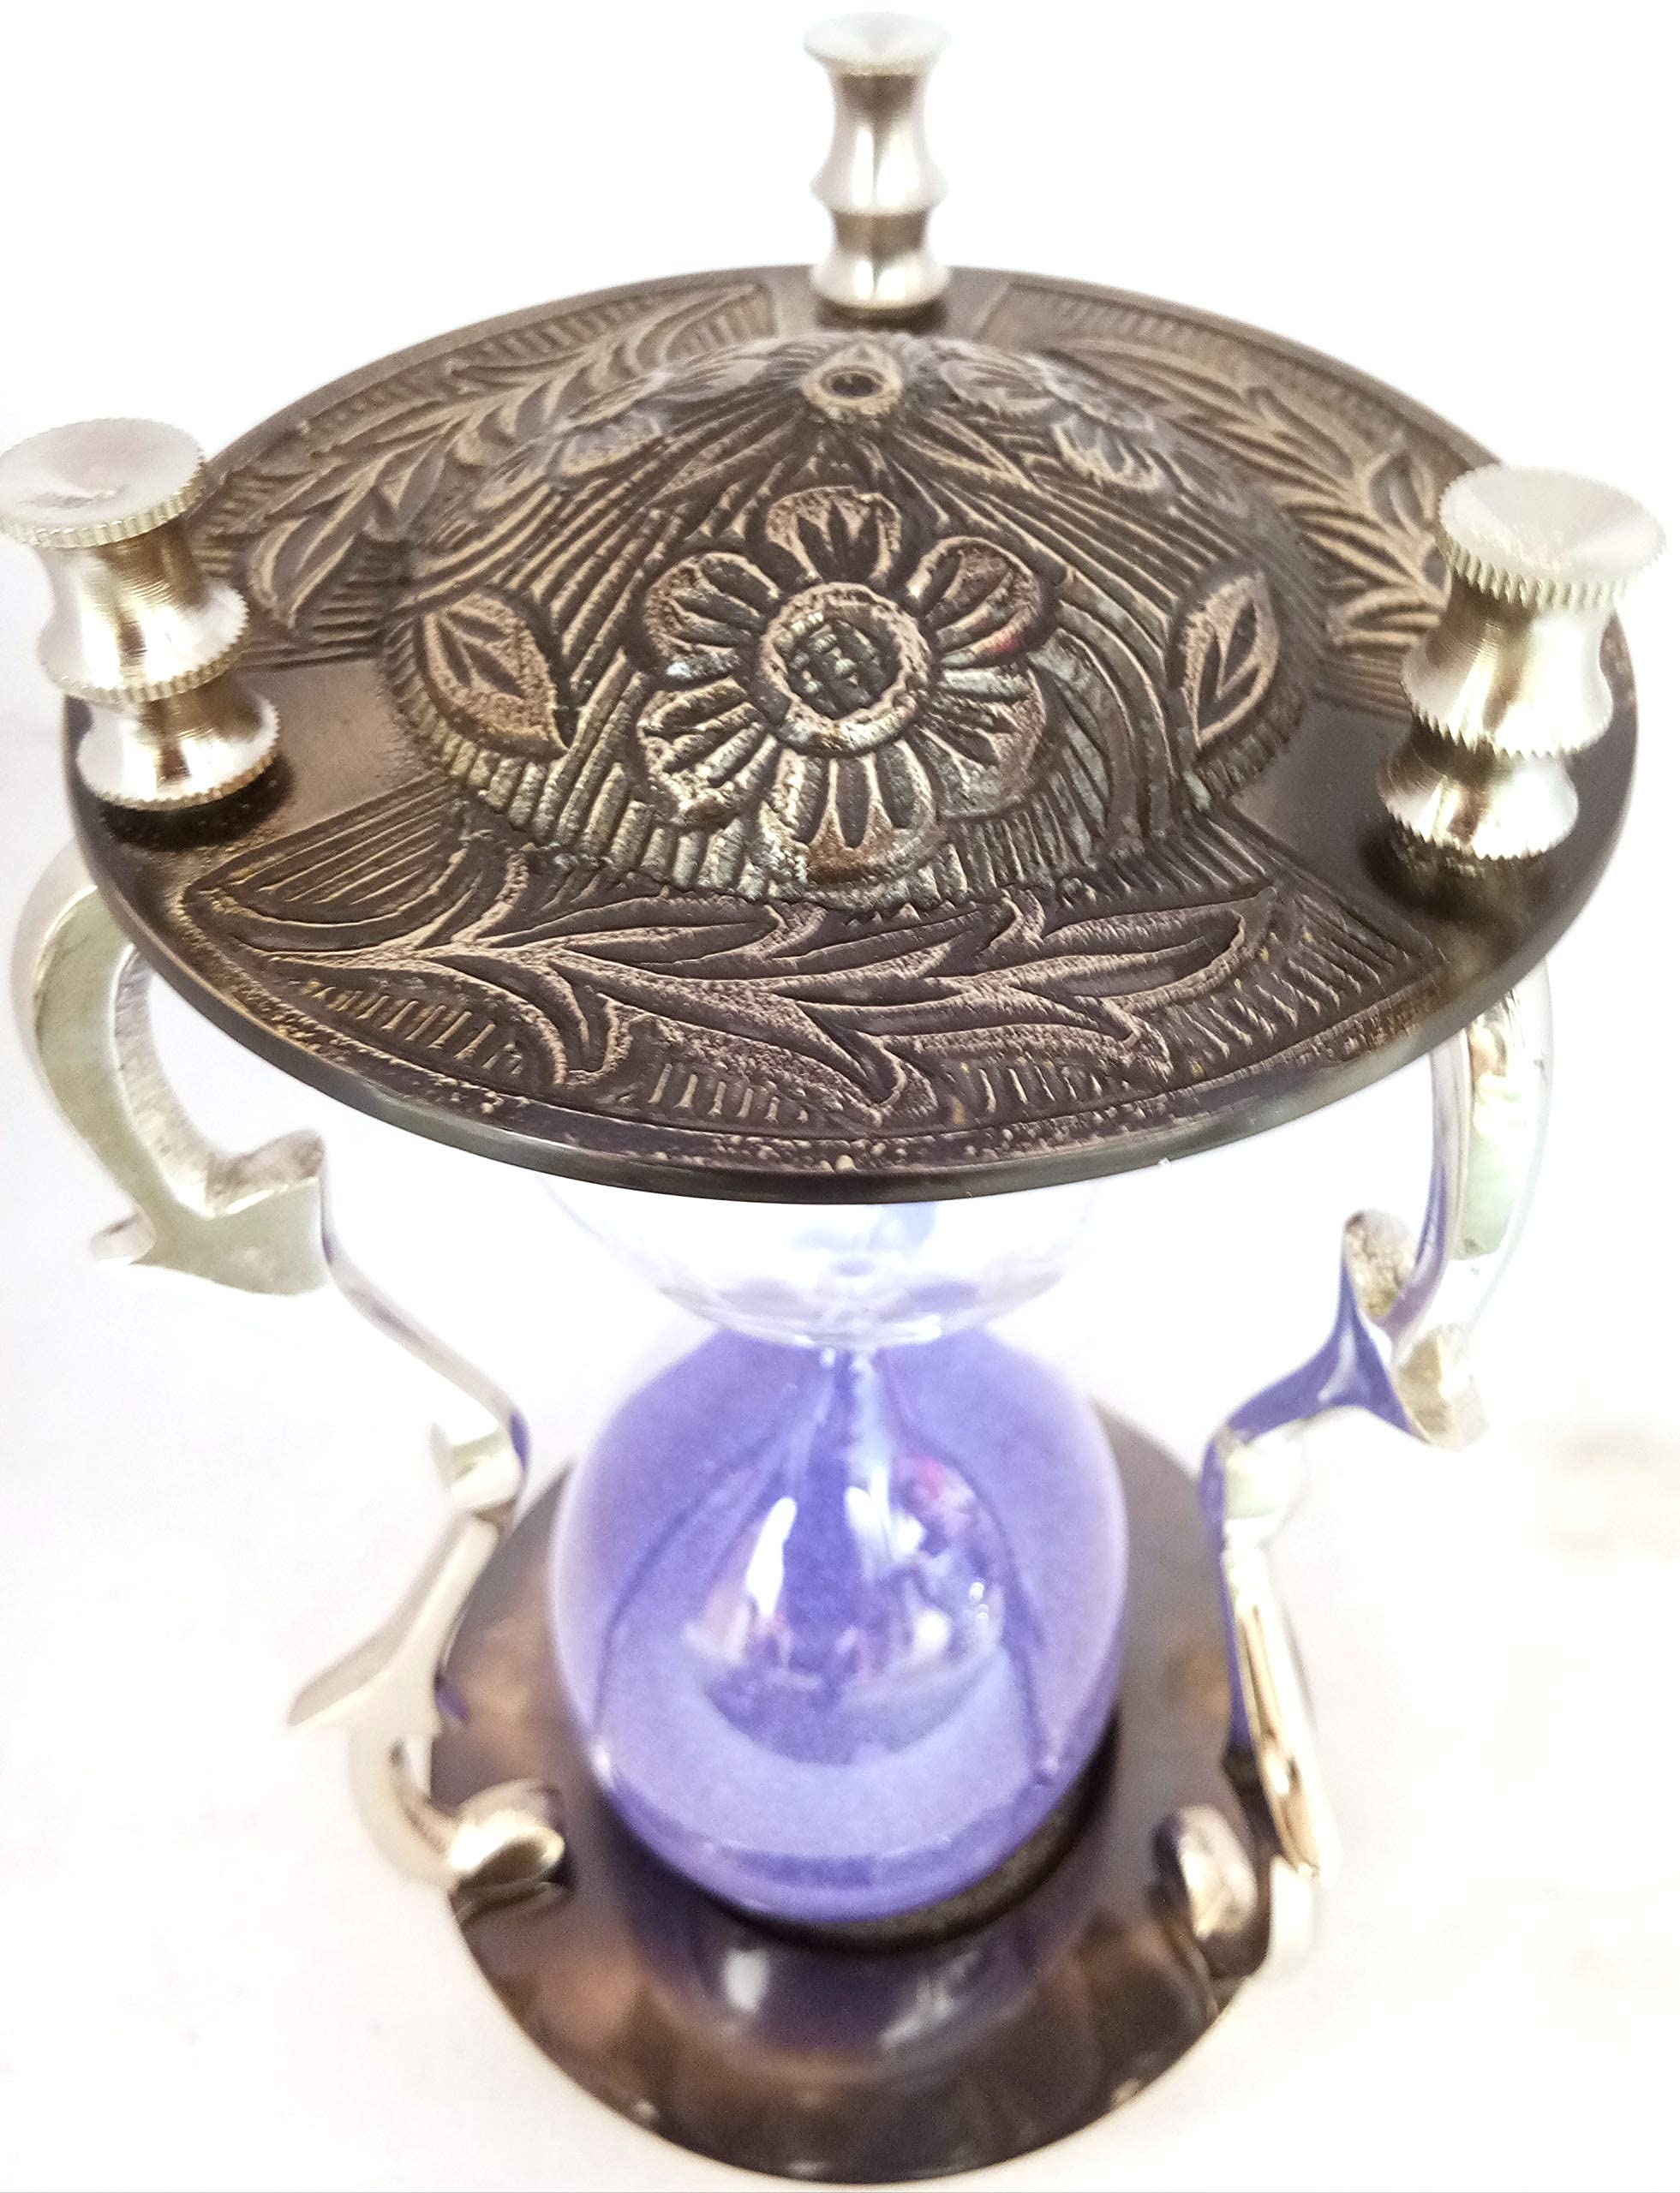 SIFAAT WORLD Antique & Nickel Decorative Hourglass Sandtimer with Purple Sand; Duration - 5 Minutes , Unique Vintage Black Metal Art Hourglass for Office Desk, Home Decor,Birthday Gift,etc.